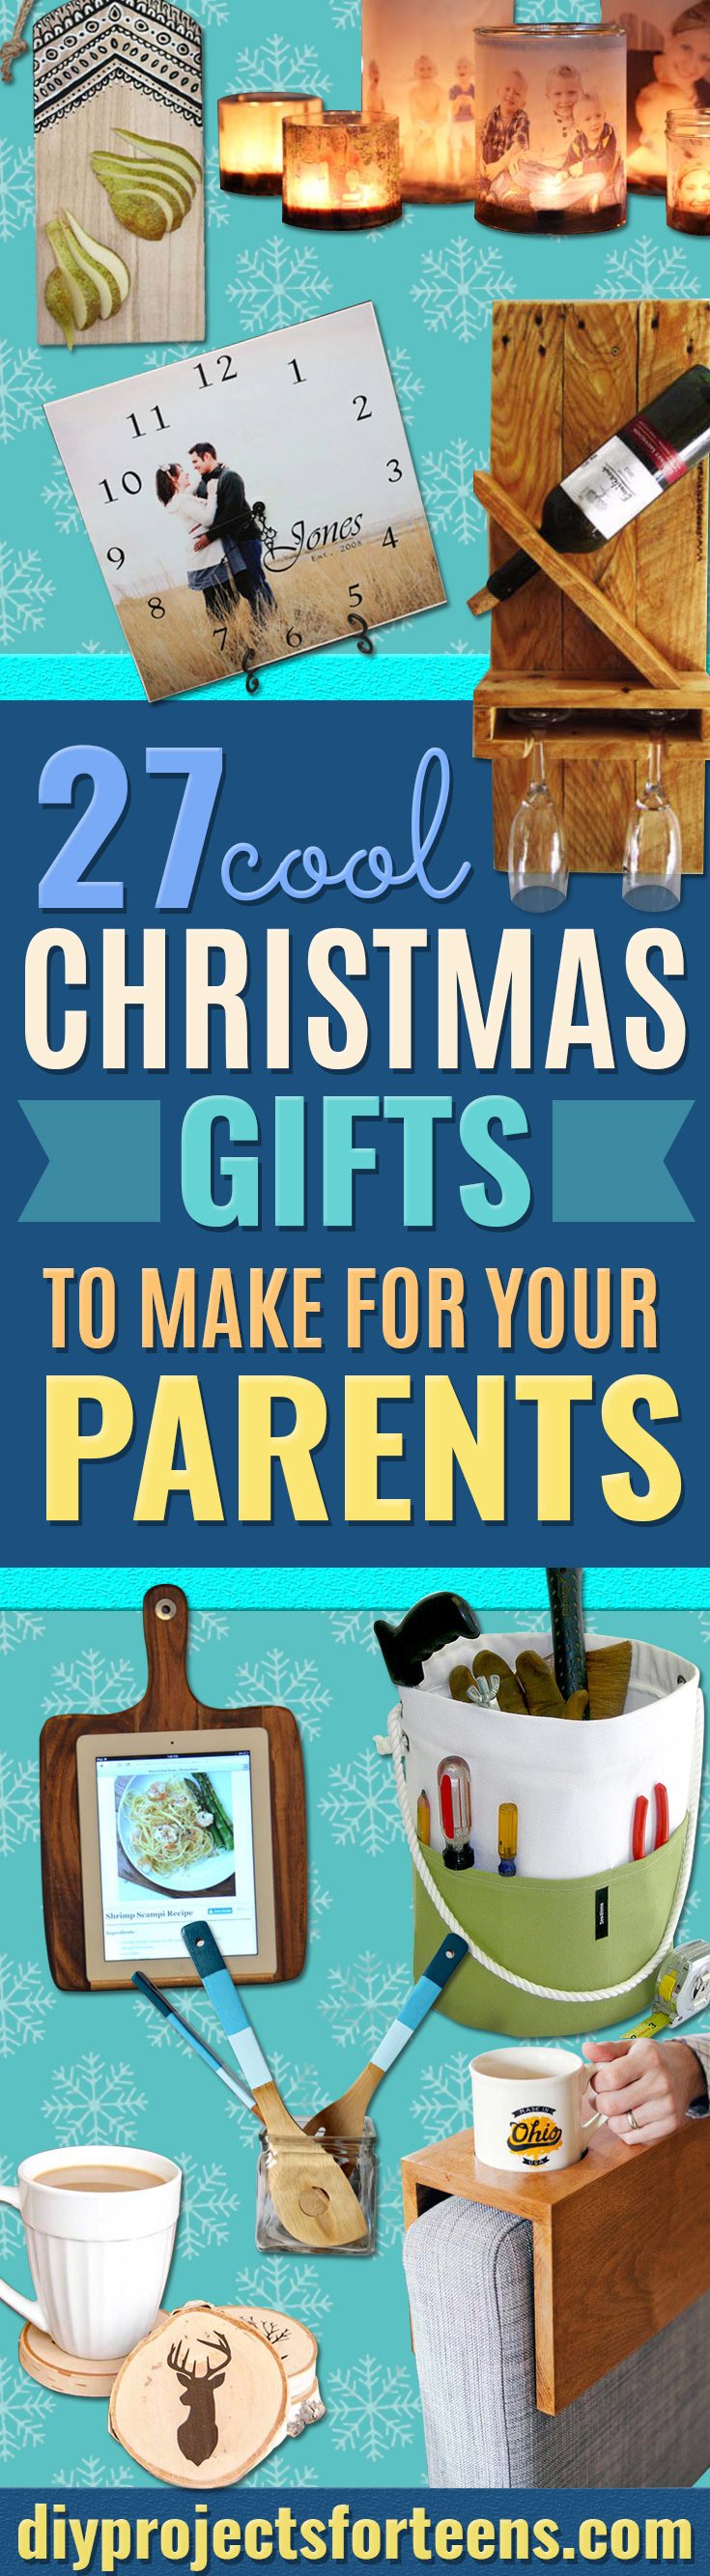 27 Diy Christmas Gifts For Mom And Dad Creative Presents To Make For Parents